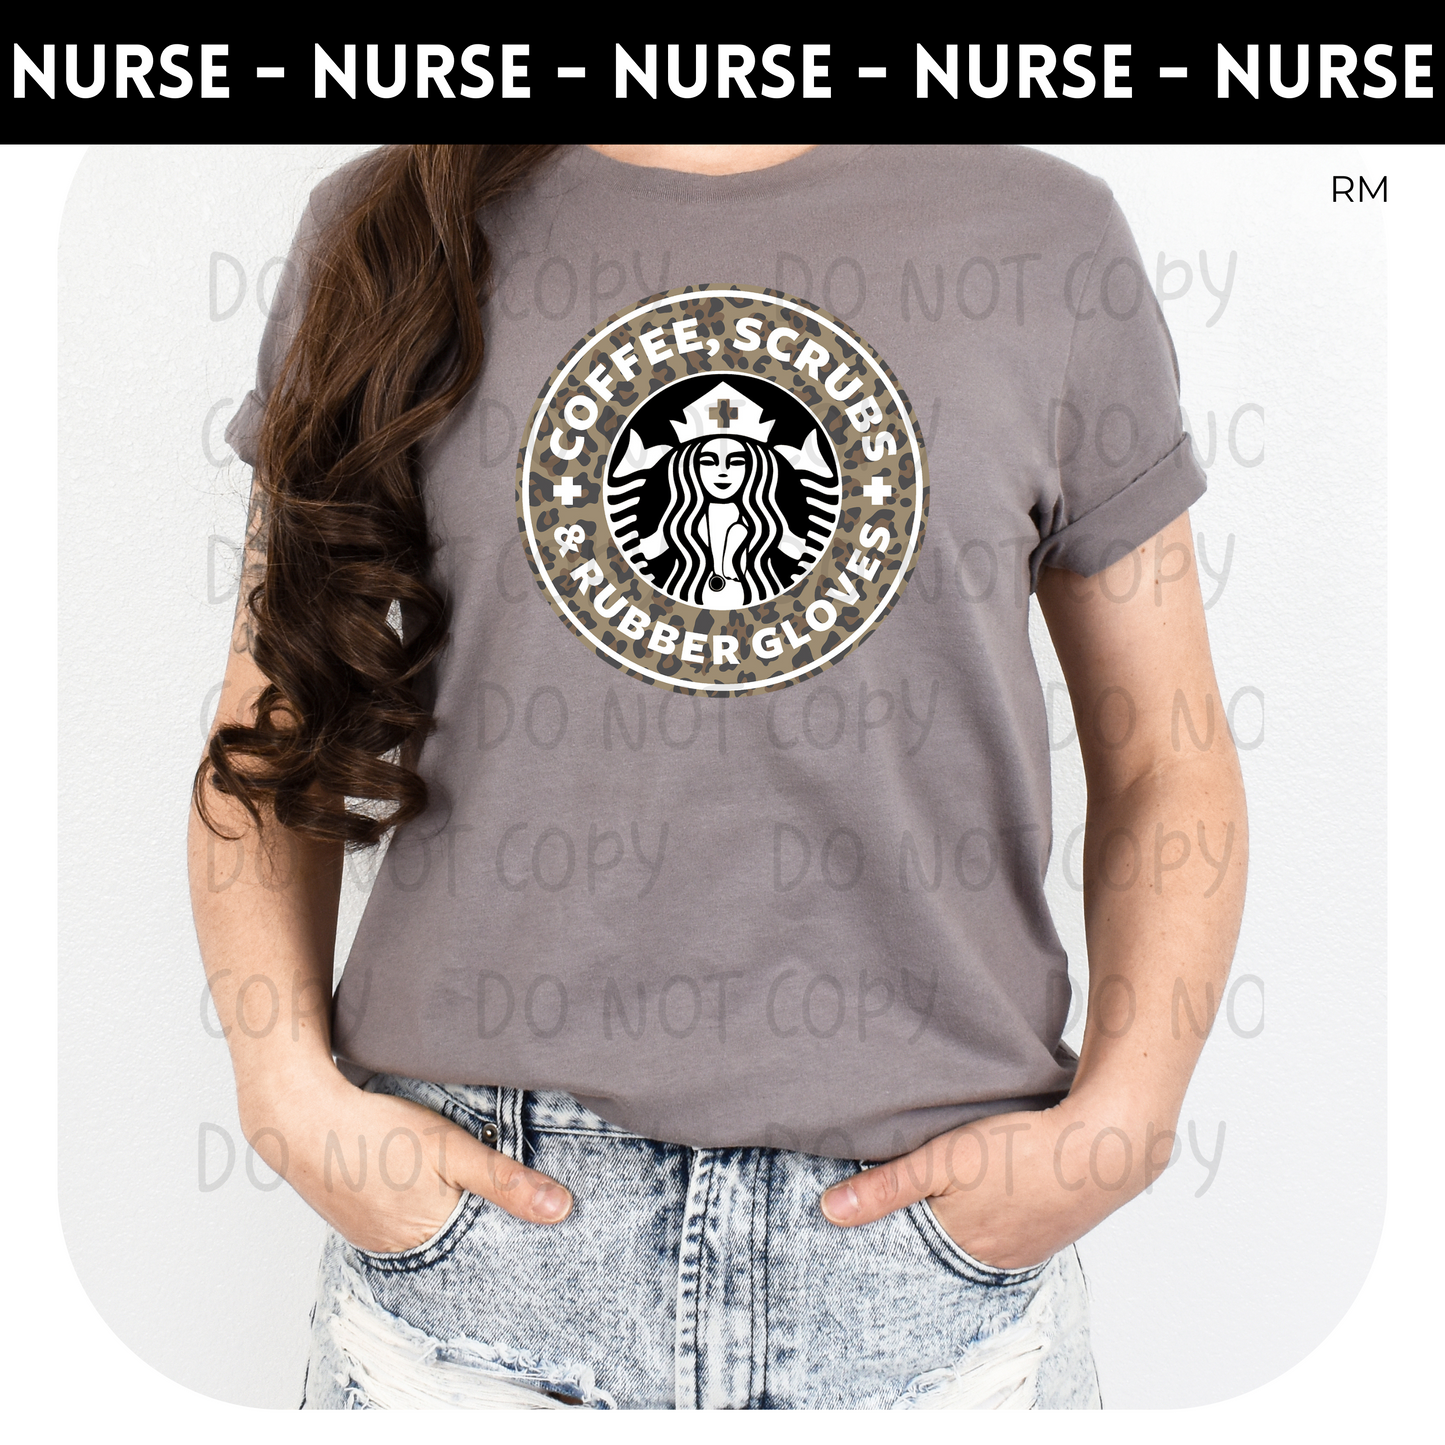 Coffee, Scrubs and Rubber Gloves TRANSFERS ONLY- Nursing 24